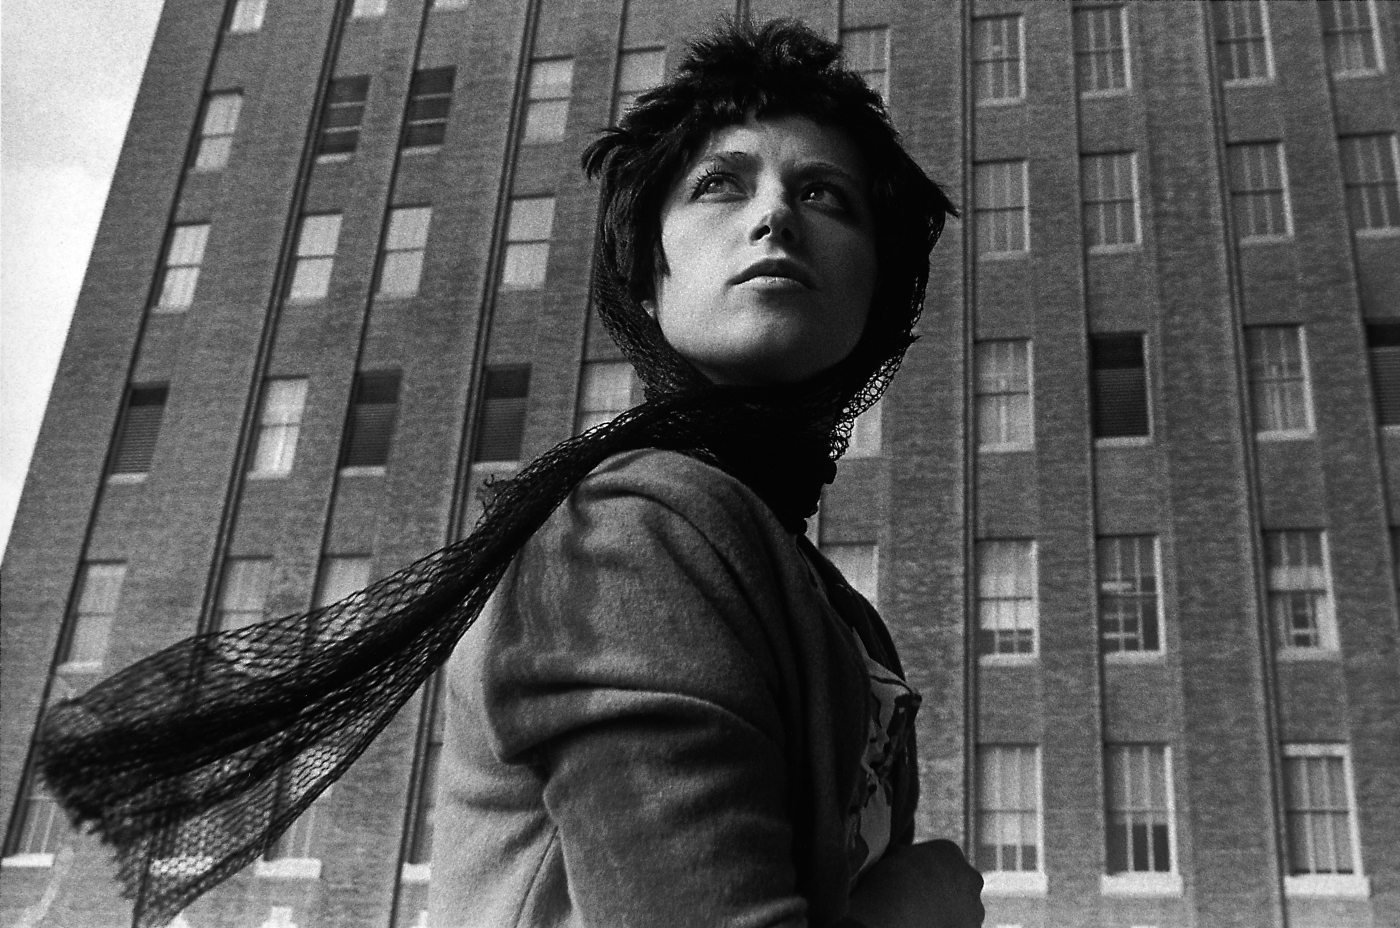 The Cindy Sherman Efect © courtesy of the artist and metro pictures, Kunstforum